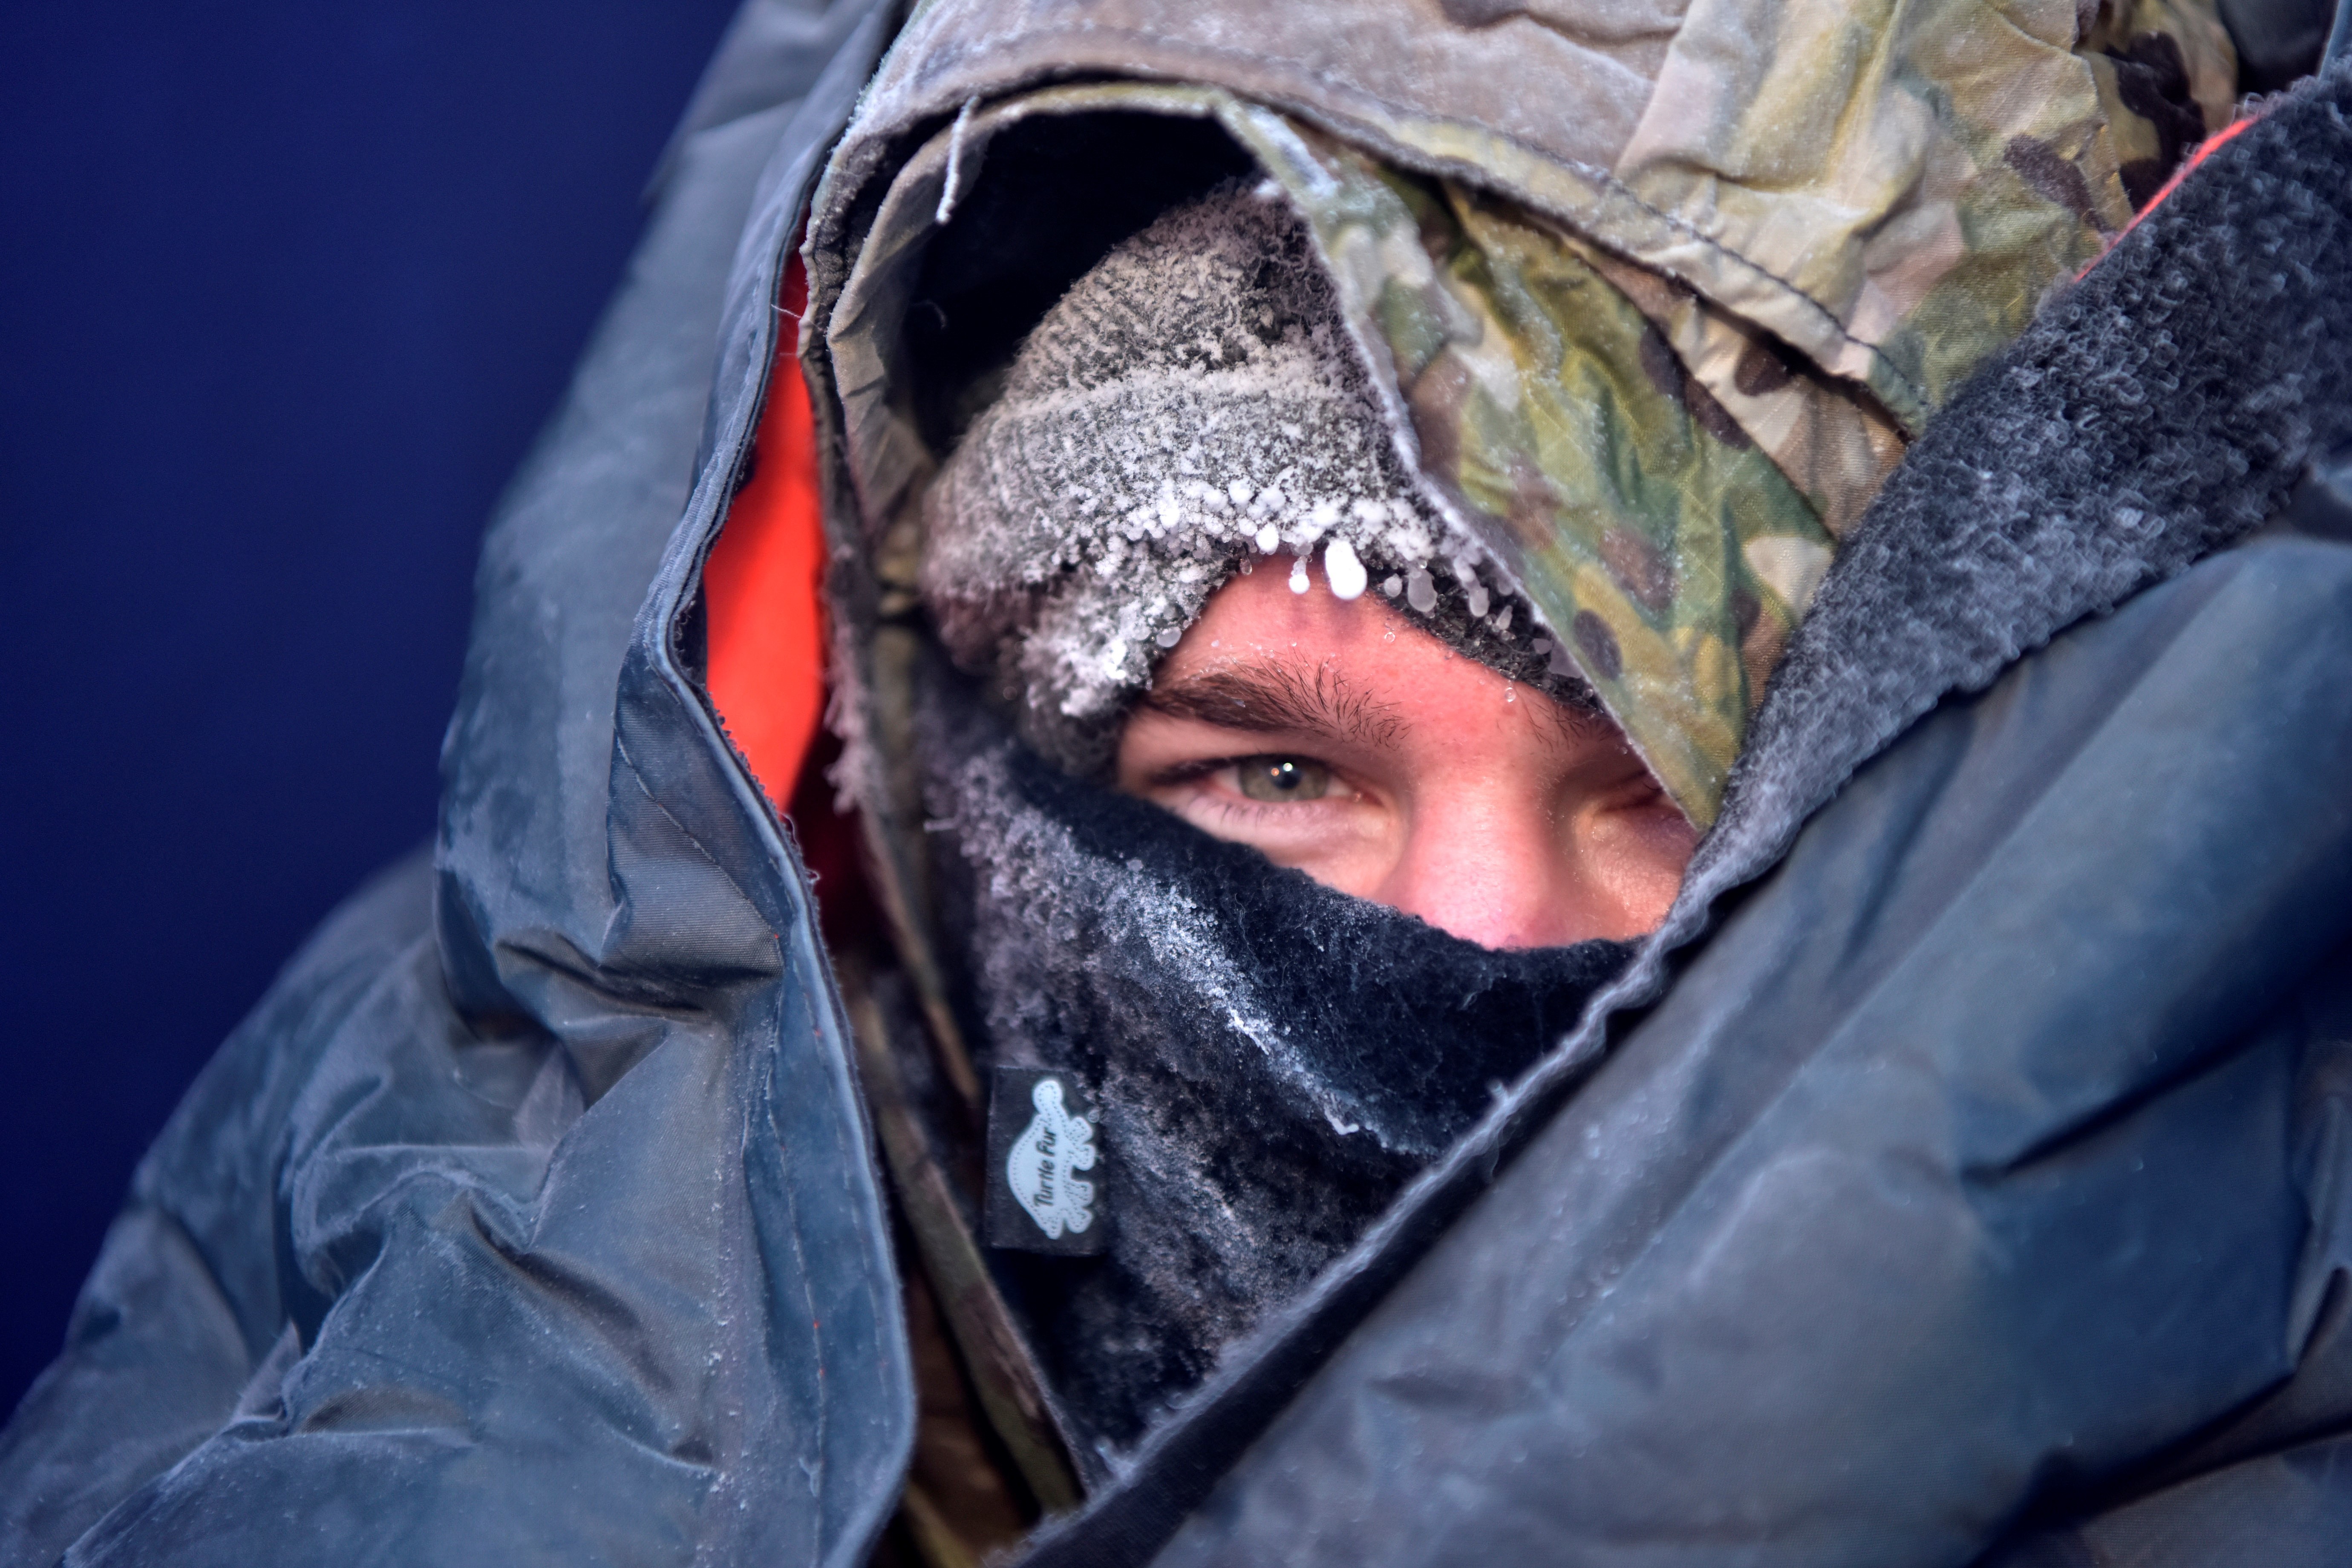 Today's Air Force Arctic survival gear tests have a long history